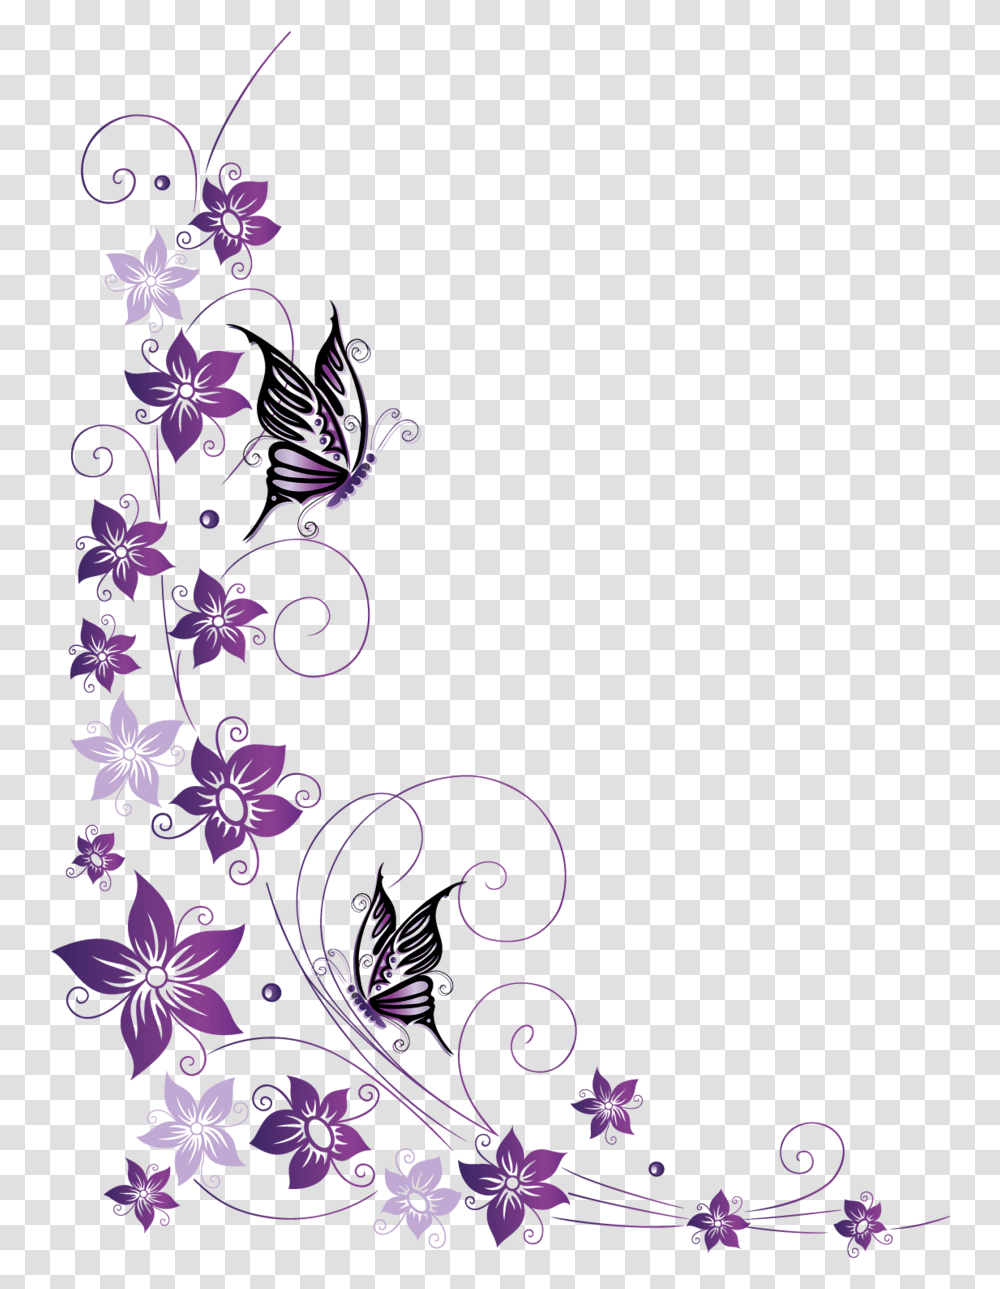 Butterfly Royalty Free Clip Art Butterfly Border Flowers And Butterflies Vector, Graphics, Floral Design, Pattern Transparent Png